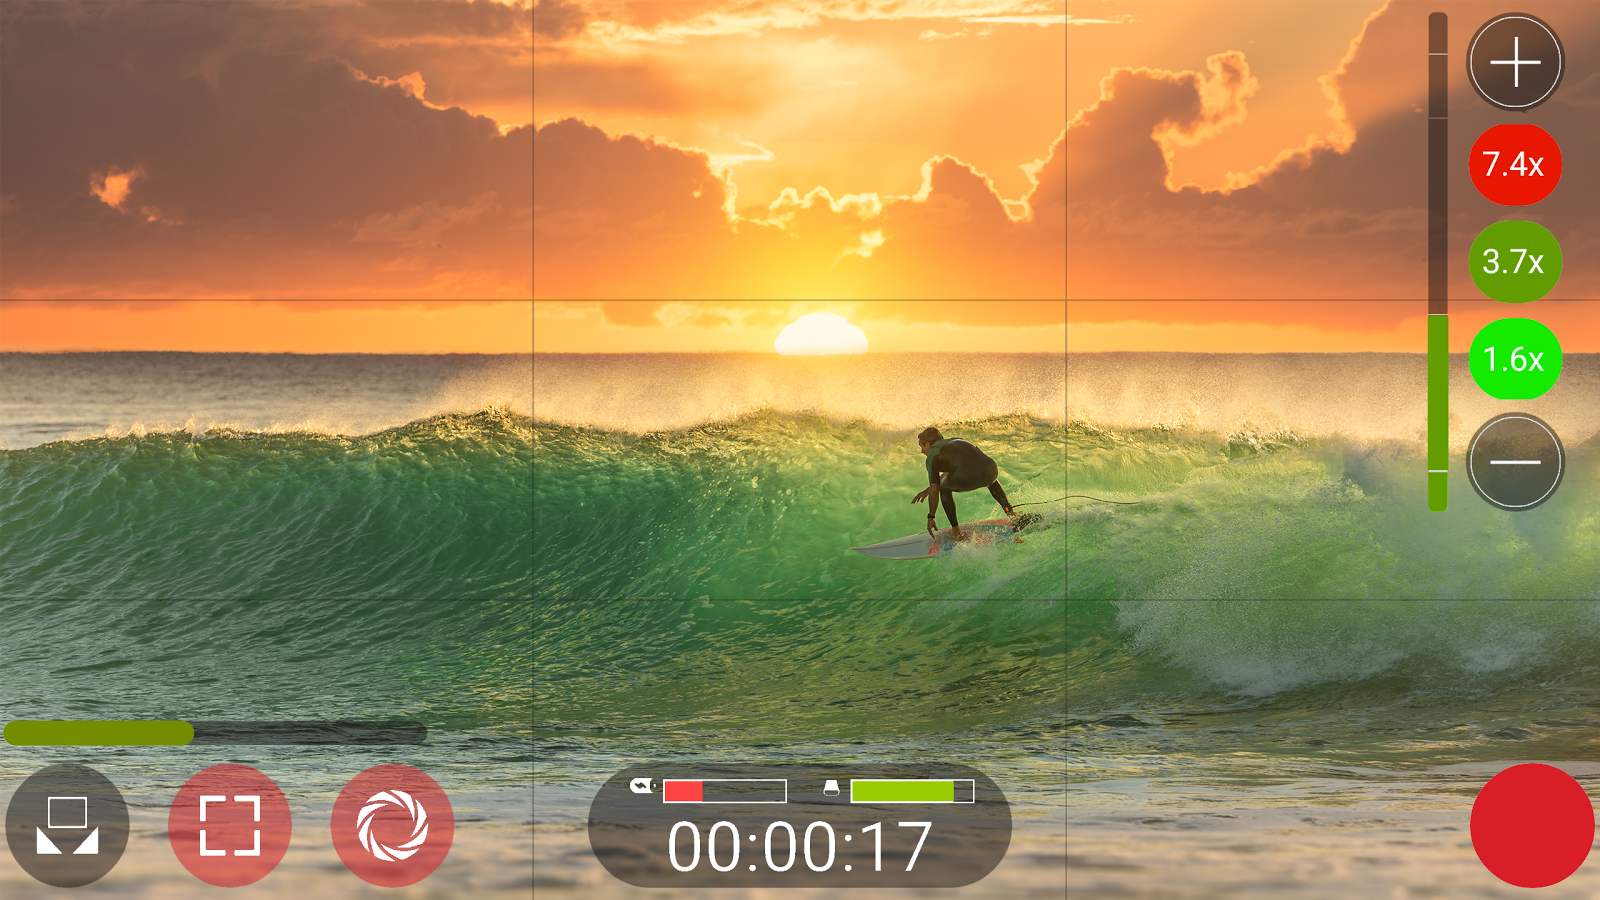 Filmic Pro APK: How to Unlock it for Free?